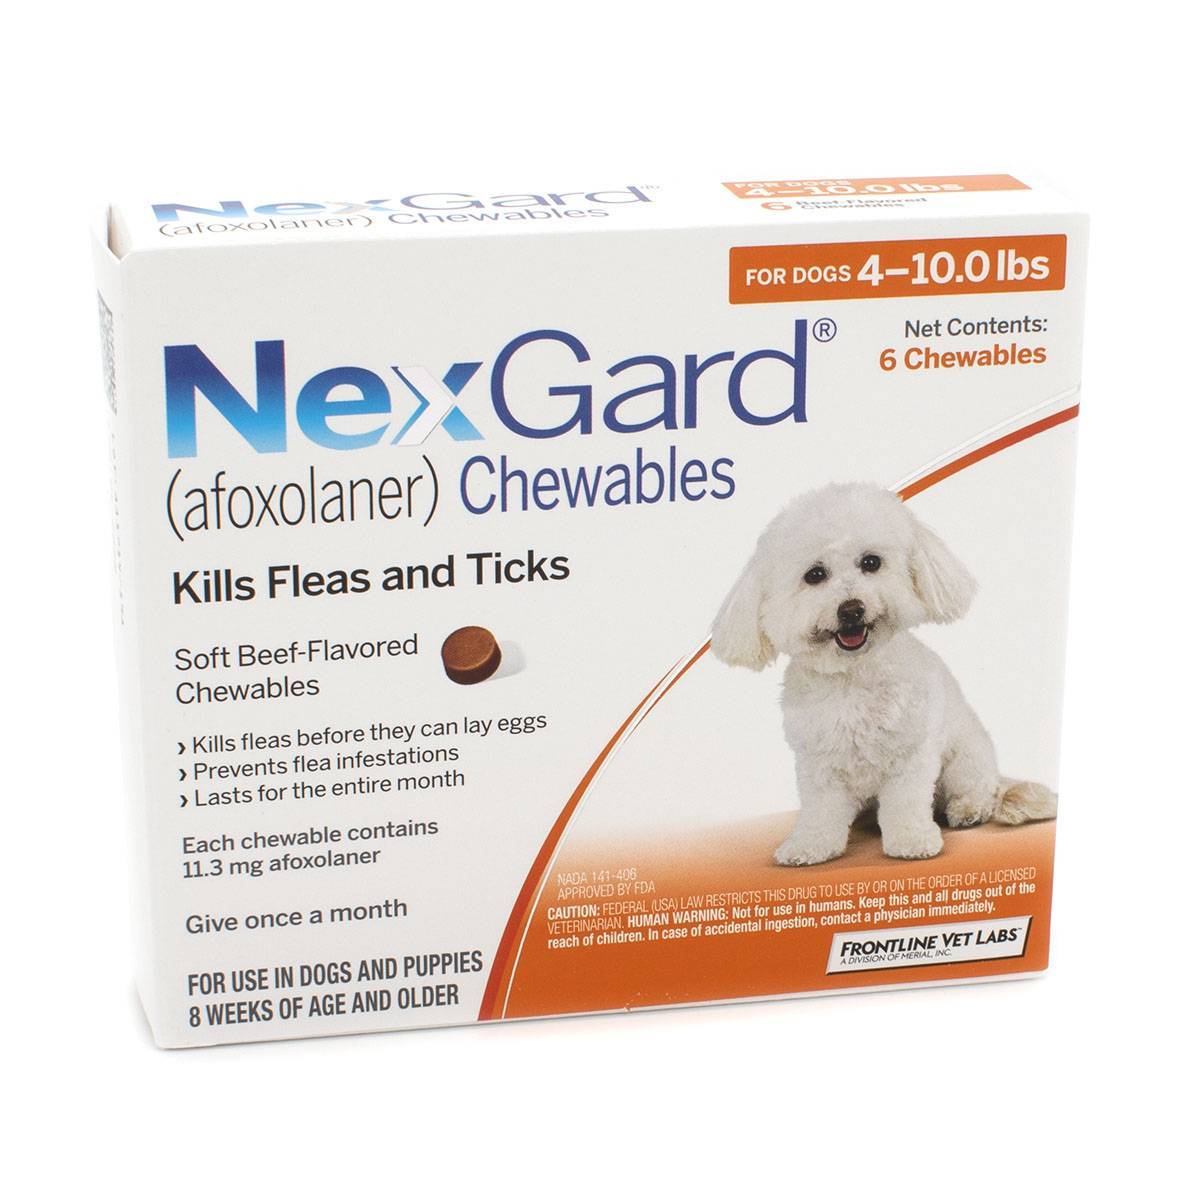 NexGard Chewables for Dogs Oral Flea and Tick Killer VetRxDirect